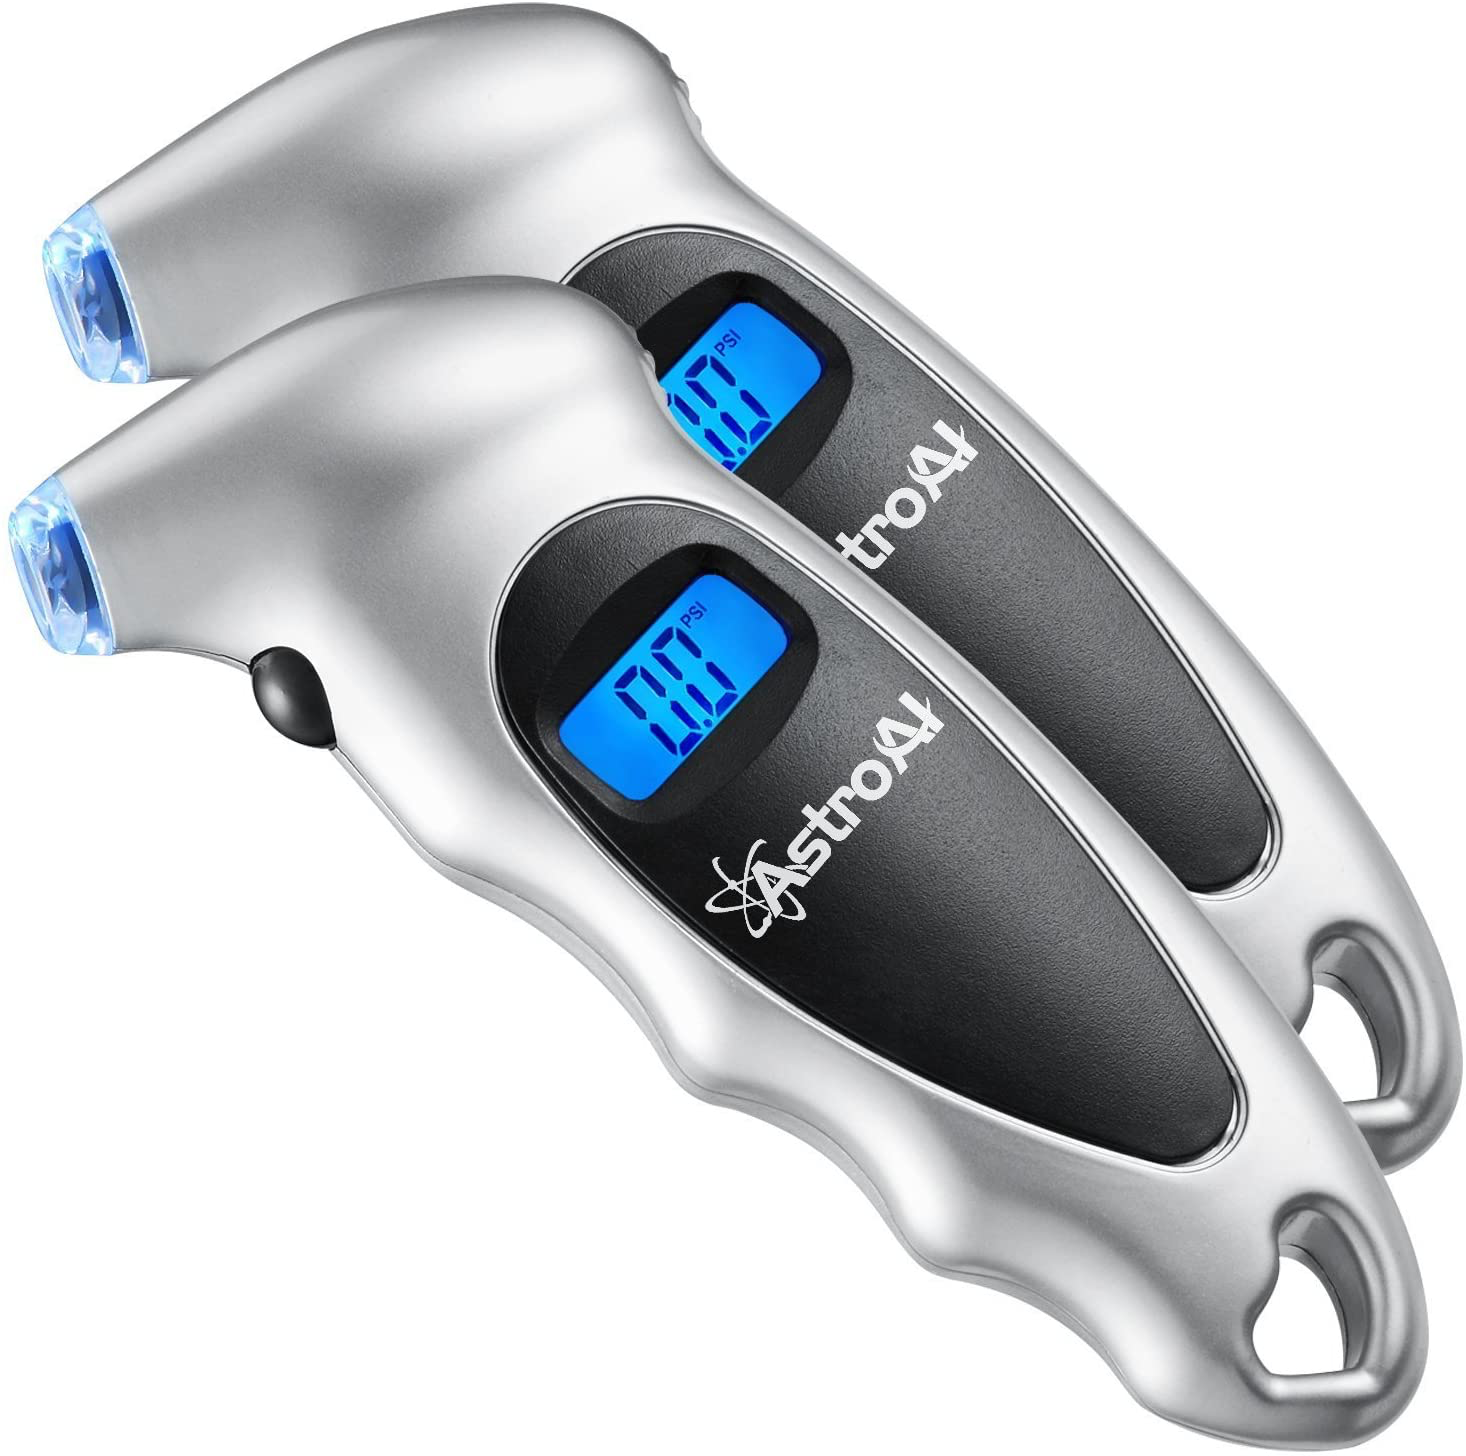 tire pressure gauge for bicycle